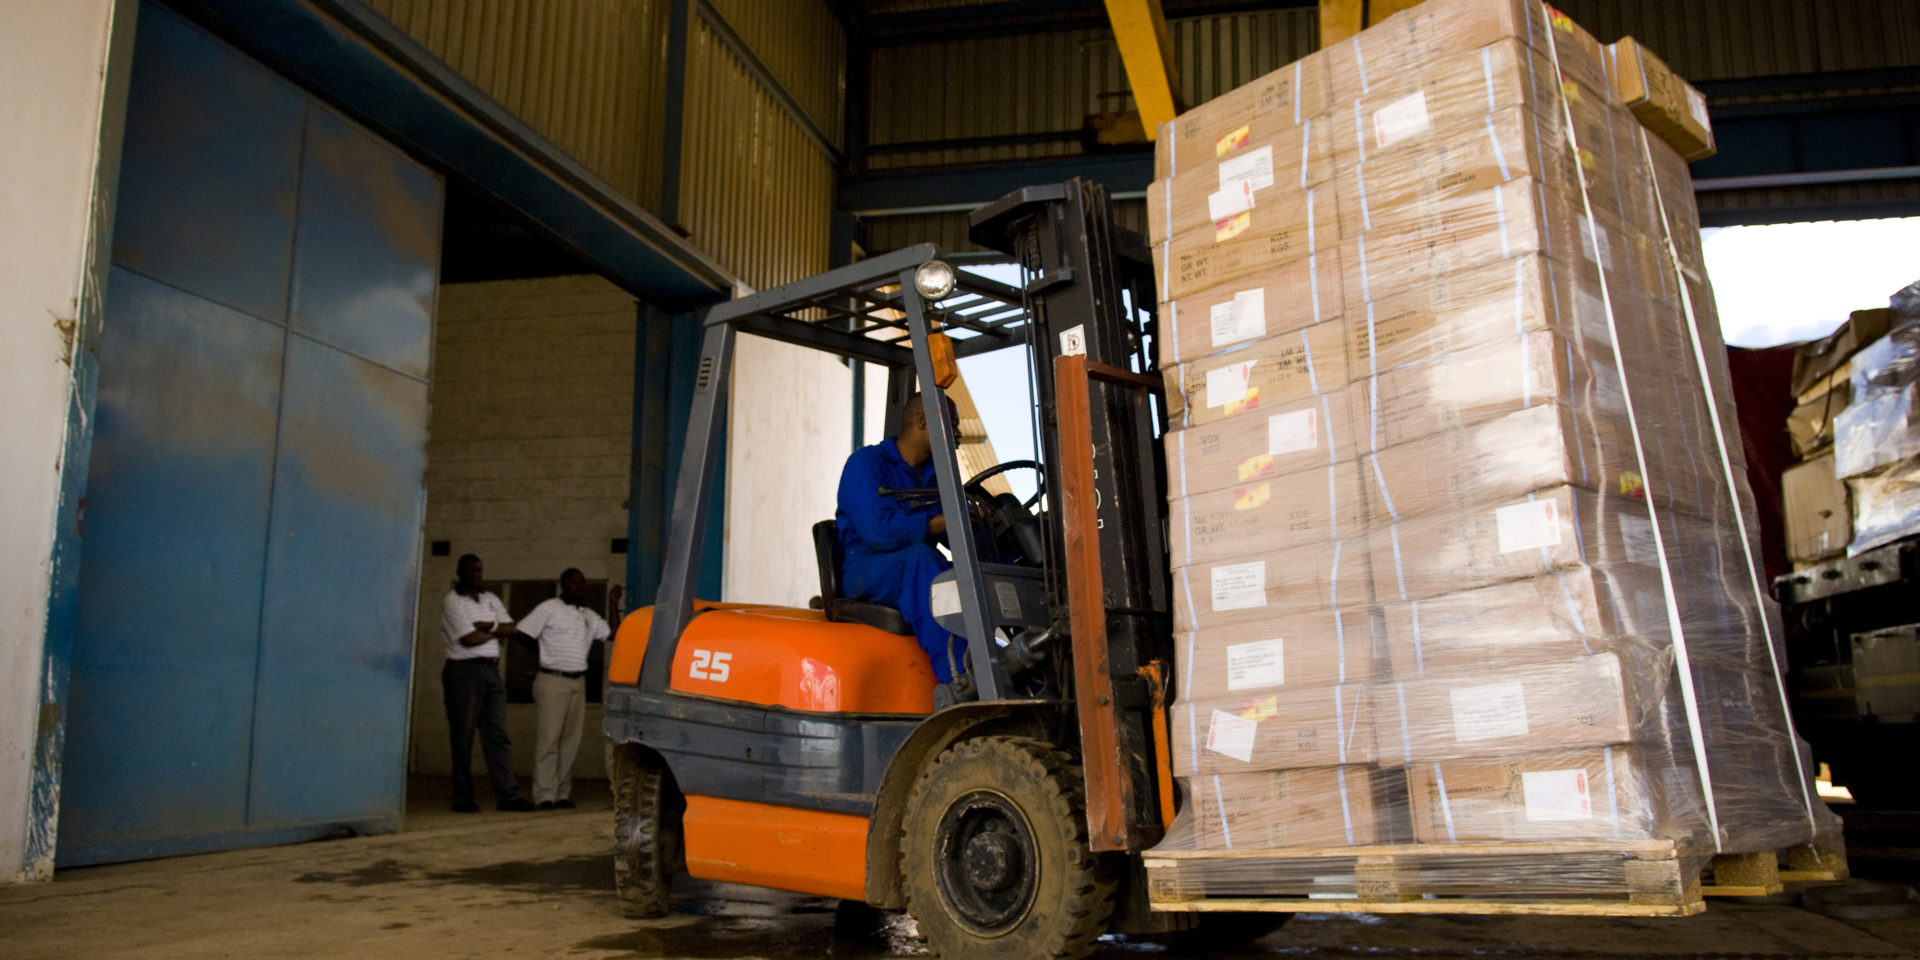 A truck laden with imported goods is unloaded in the Global Logistics Warehouses, Lusaka, Zambia